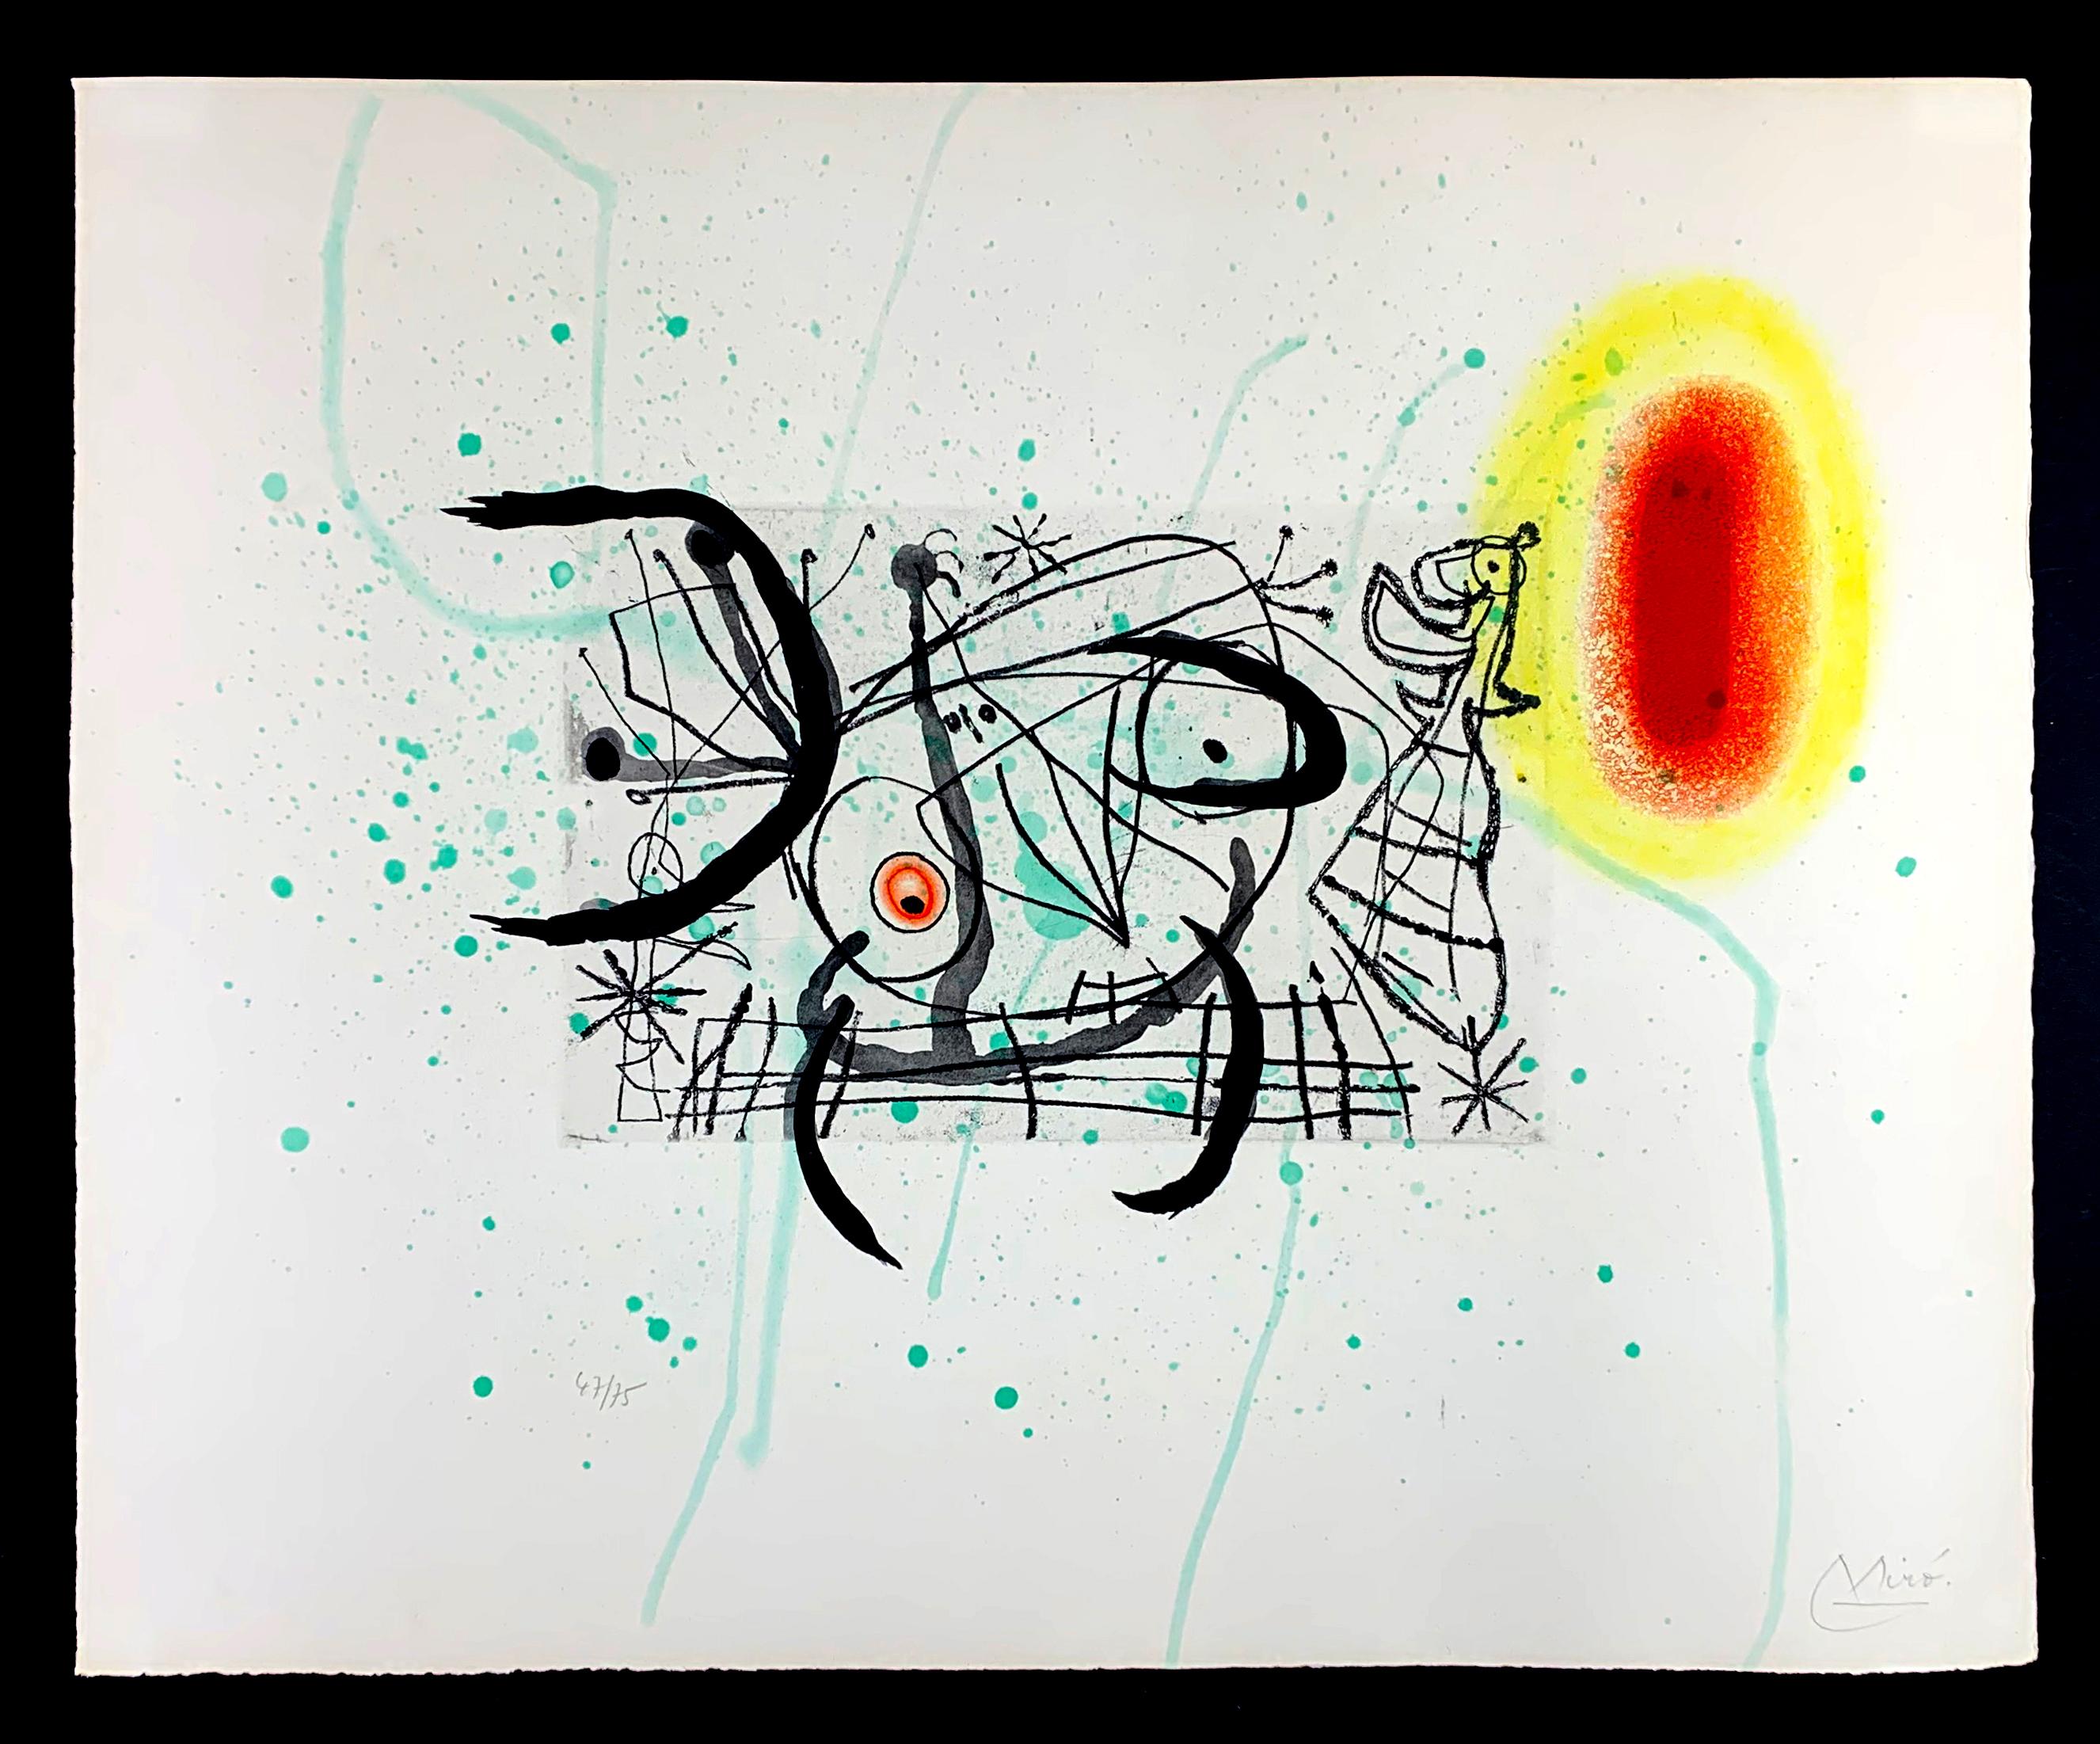 Joan Miró Abstract Print - Fissure 11, 1969